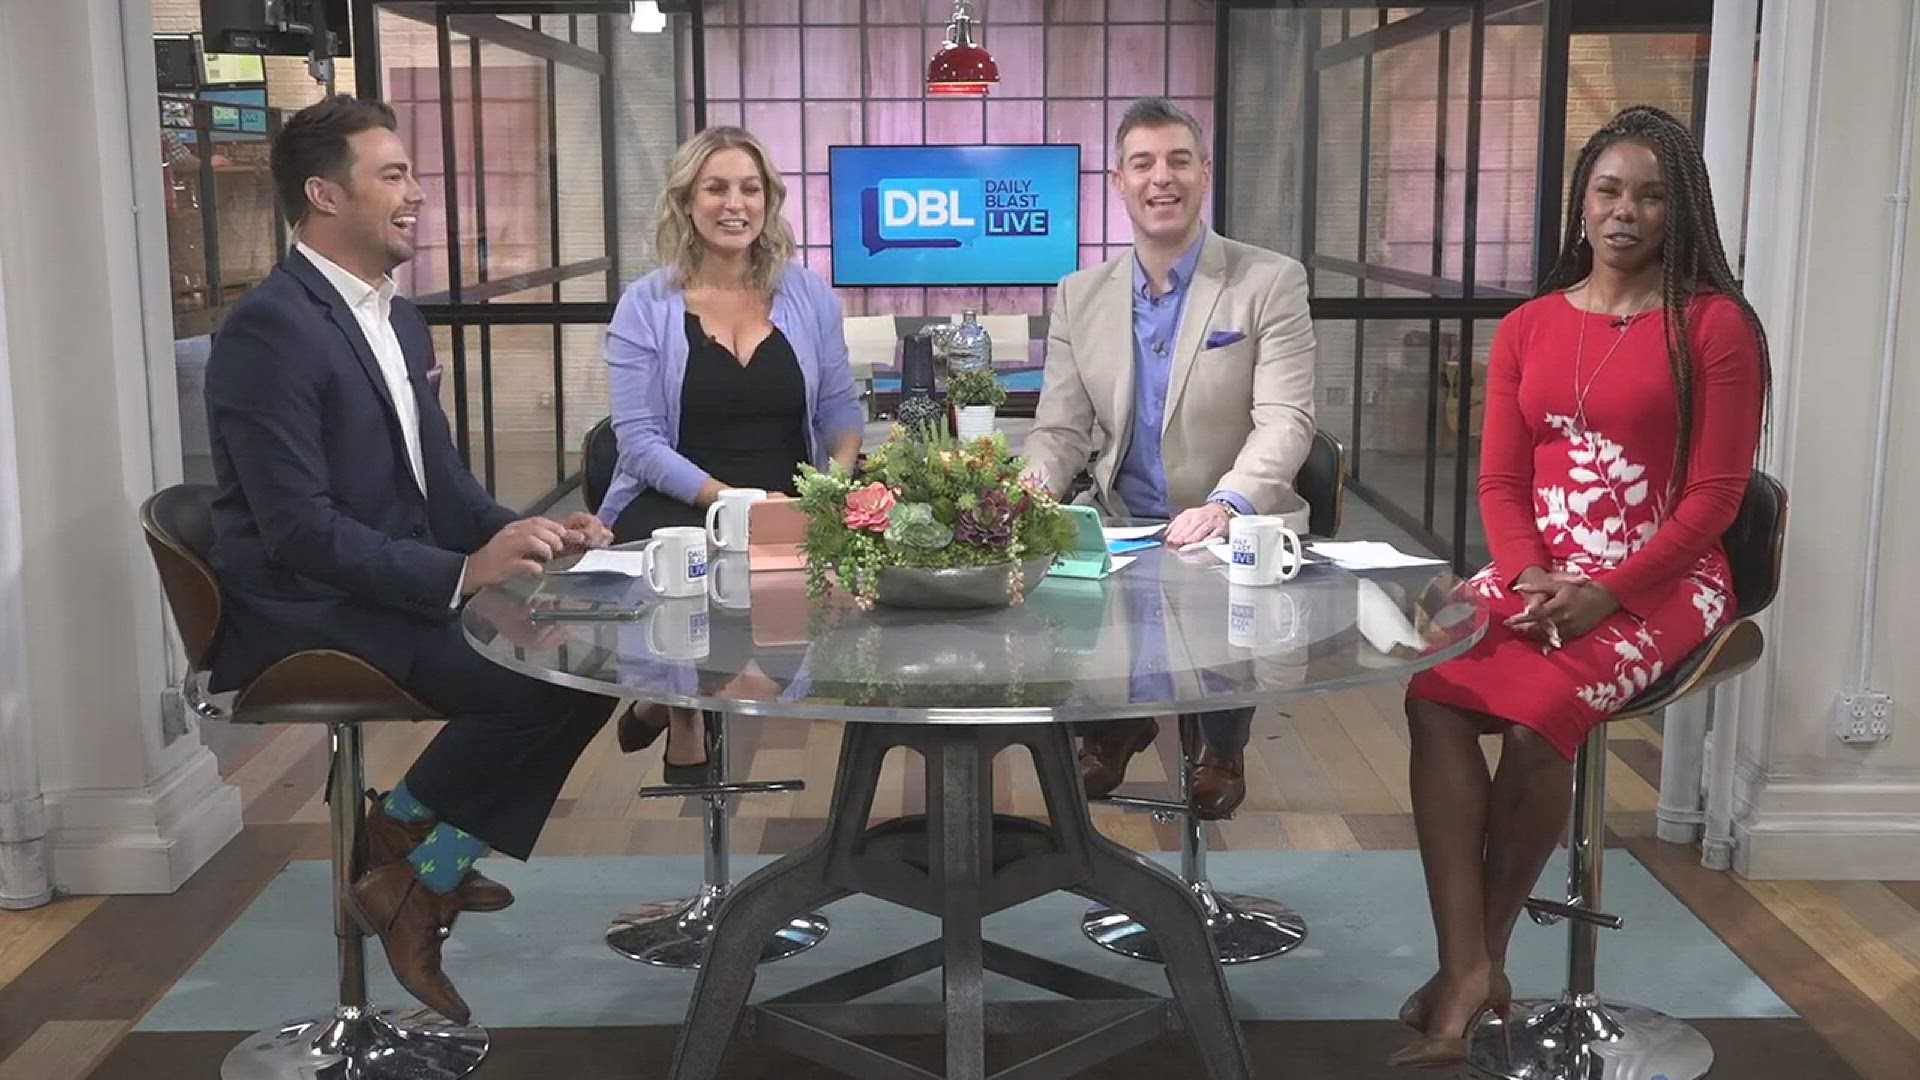 A new bill in New York has everyone talking, especially overworked employees. The law would make it illegal to require workers to check emails outside of their regular work hours. Daily Blast LIVE co-hosts discuss how American workers can disconnect witho